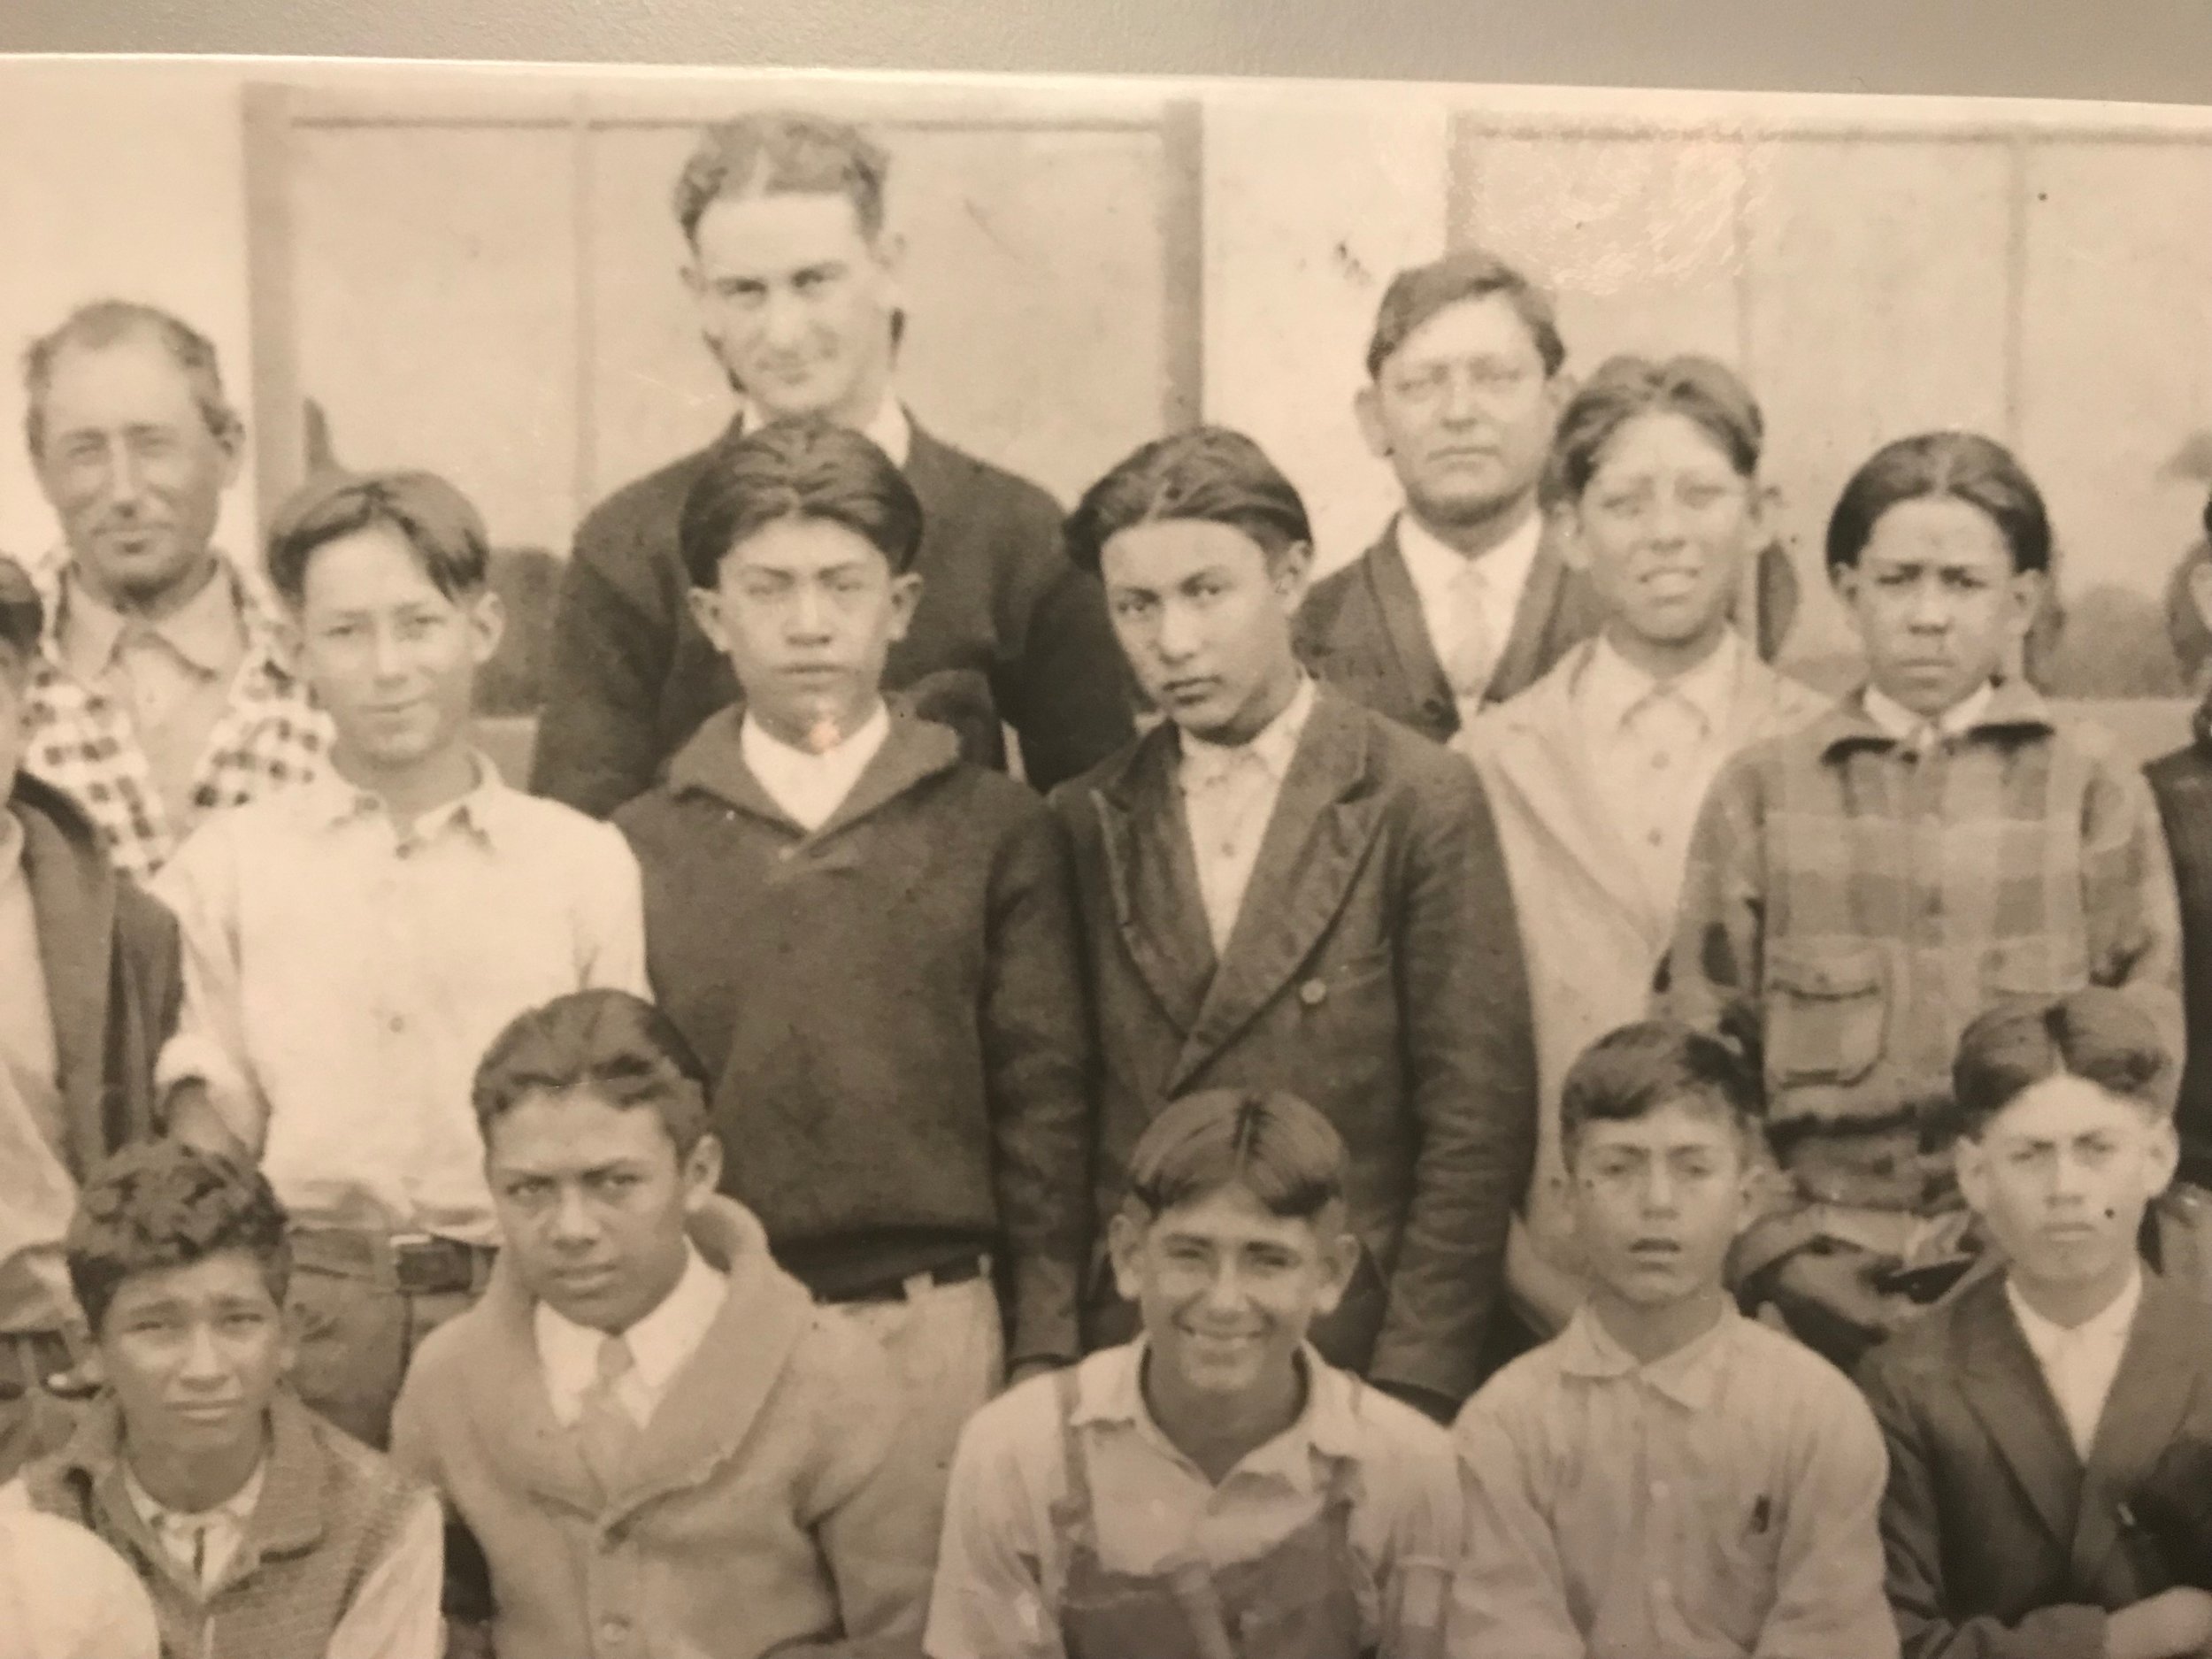  Young Lyndon Johnson with his students in Cotulla, Texas. He later said his experience in the poor Mexican-American community fueled his commitment to fight poverty and discrimination. 